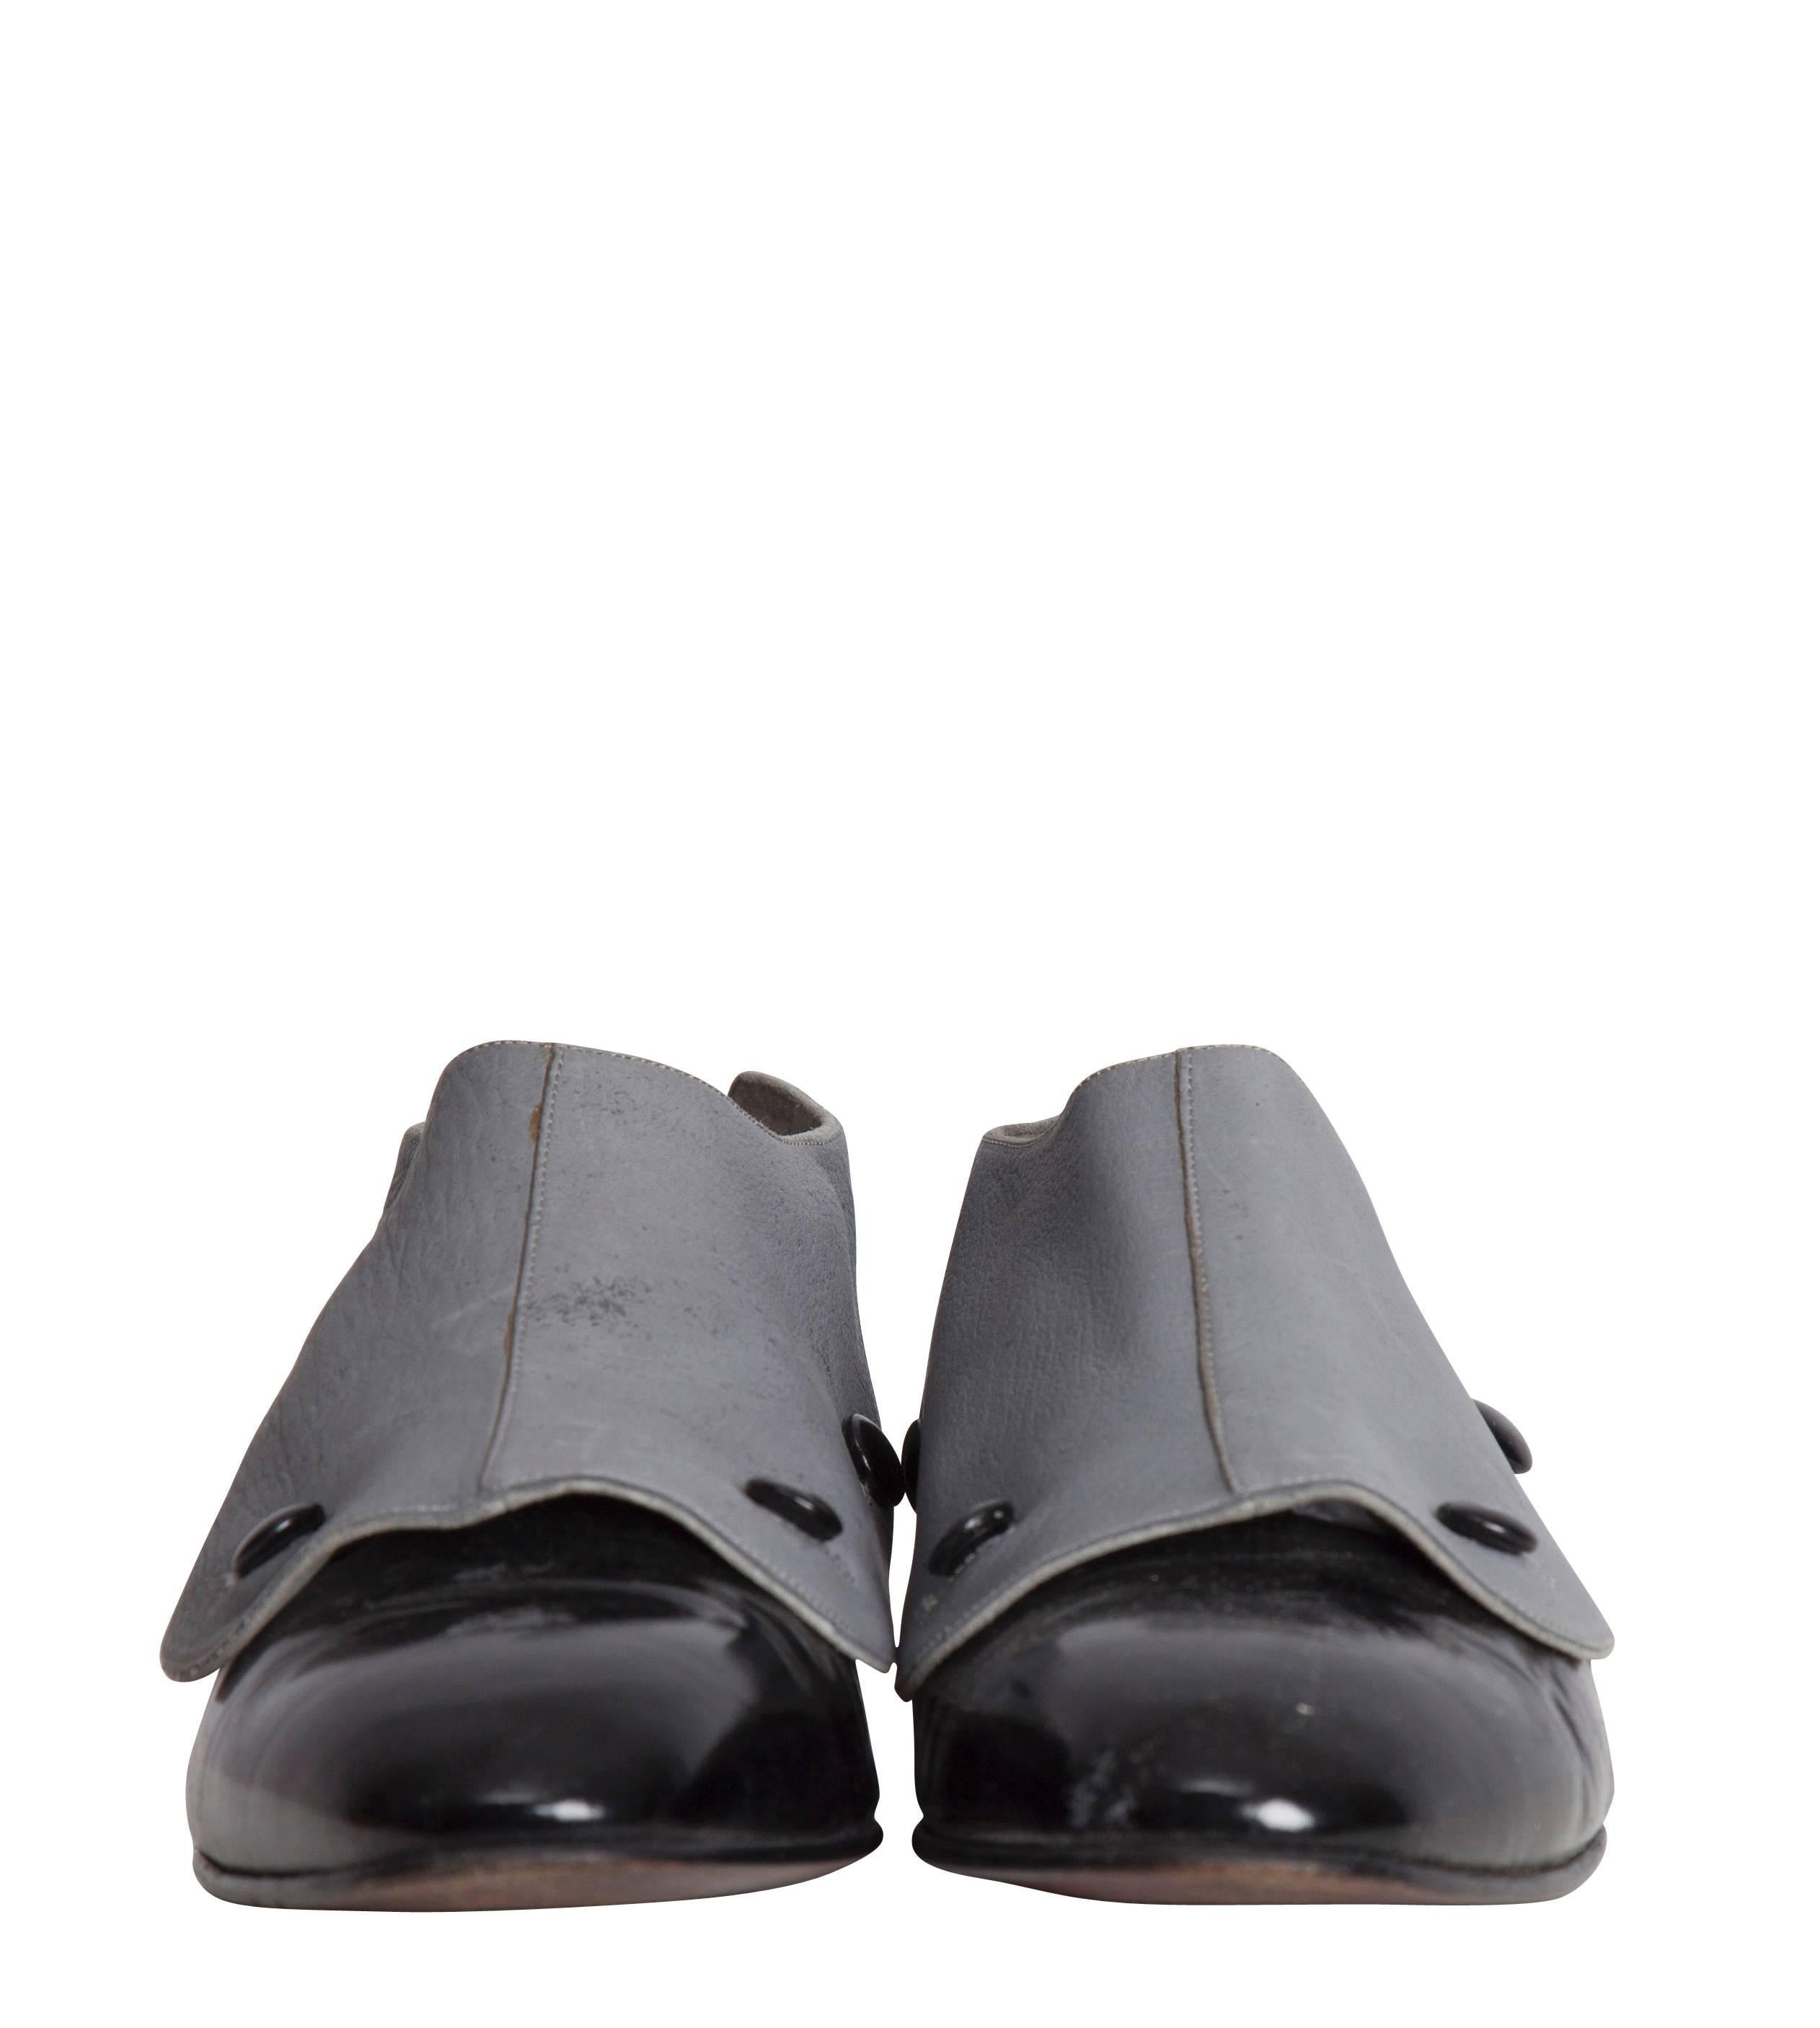 A 1985 Manolo Blahnik's versatile two-tone pair of patent leather flat shoes featuring a buttoned grey suede overlay, which when removed, reveals a pair of classic black ballet flats. A similar pair is featured in the Metropolitan Museum archive